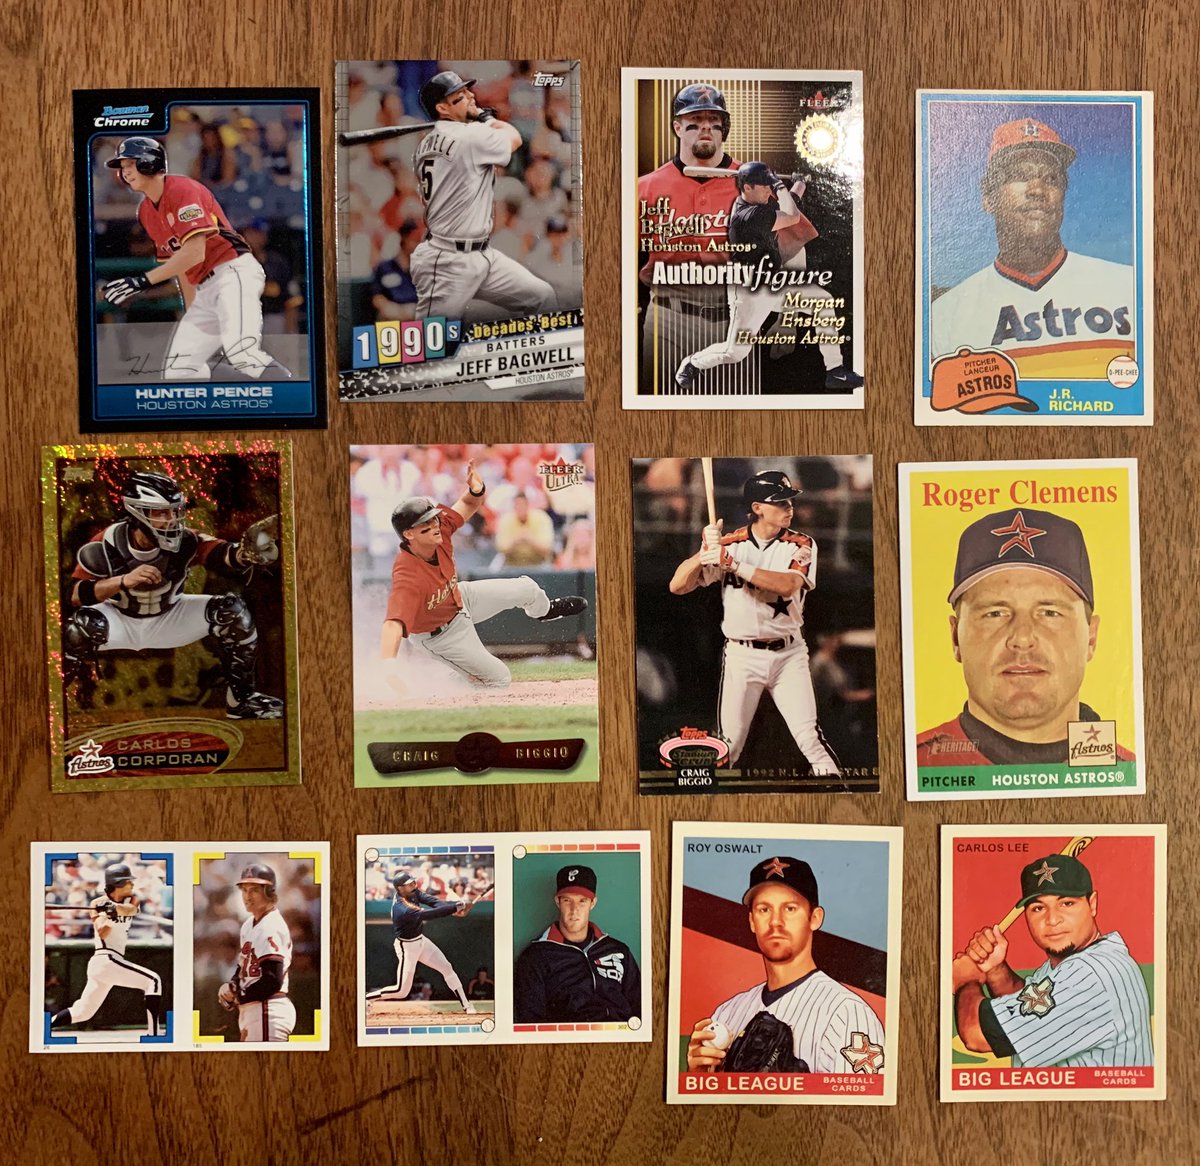 Next: a Canadian haul from tigers fan rmpaq5 at  @tradingcarddb. That’s an OPC Richard,  @HeavyJ28. Shiny new Bagwells, minis, OPC stickers, a  @hunterpence rookie!